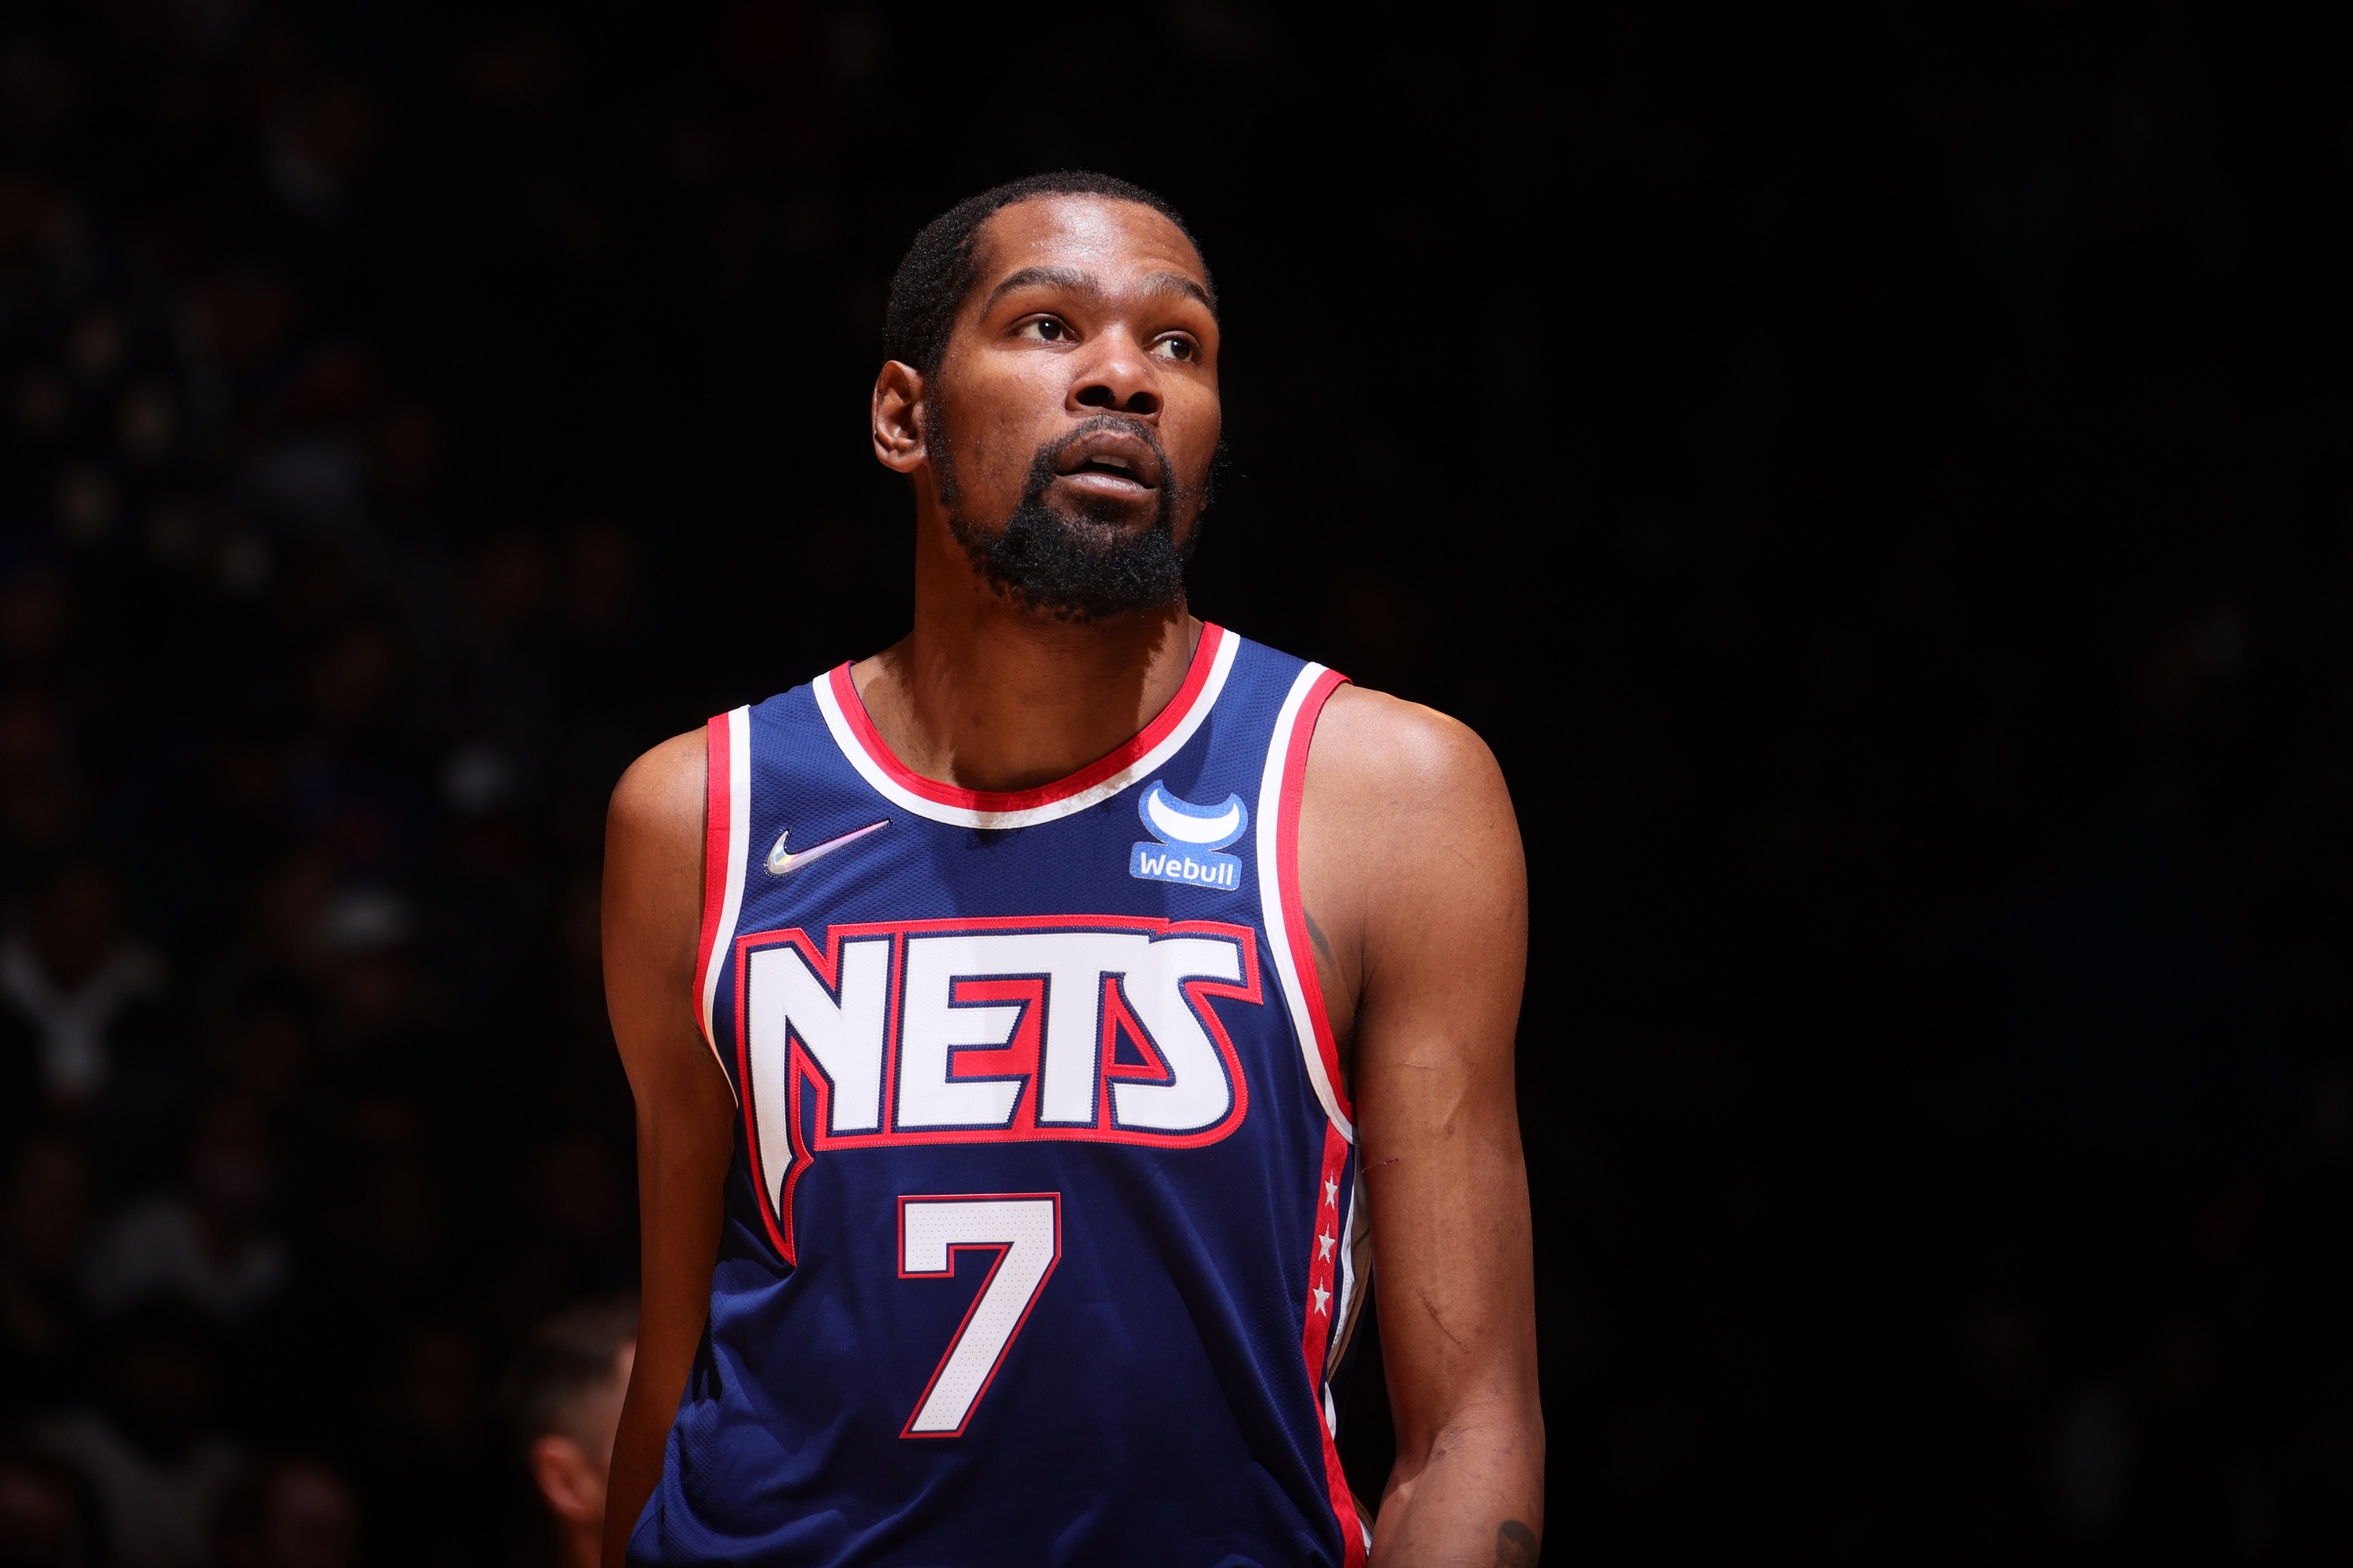 Nets' Kevin Durant on Minutes Limit: 'I Enjoy to Play; I Want to Play 48 Minutes'